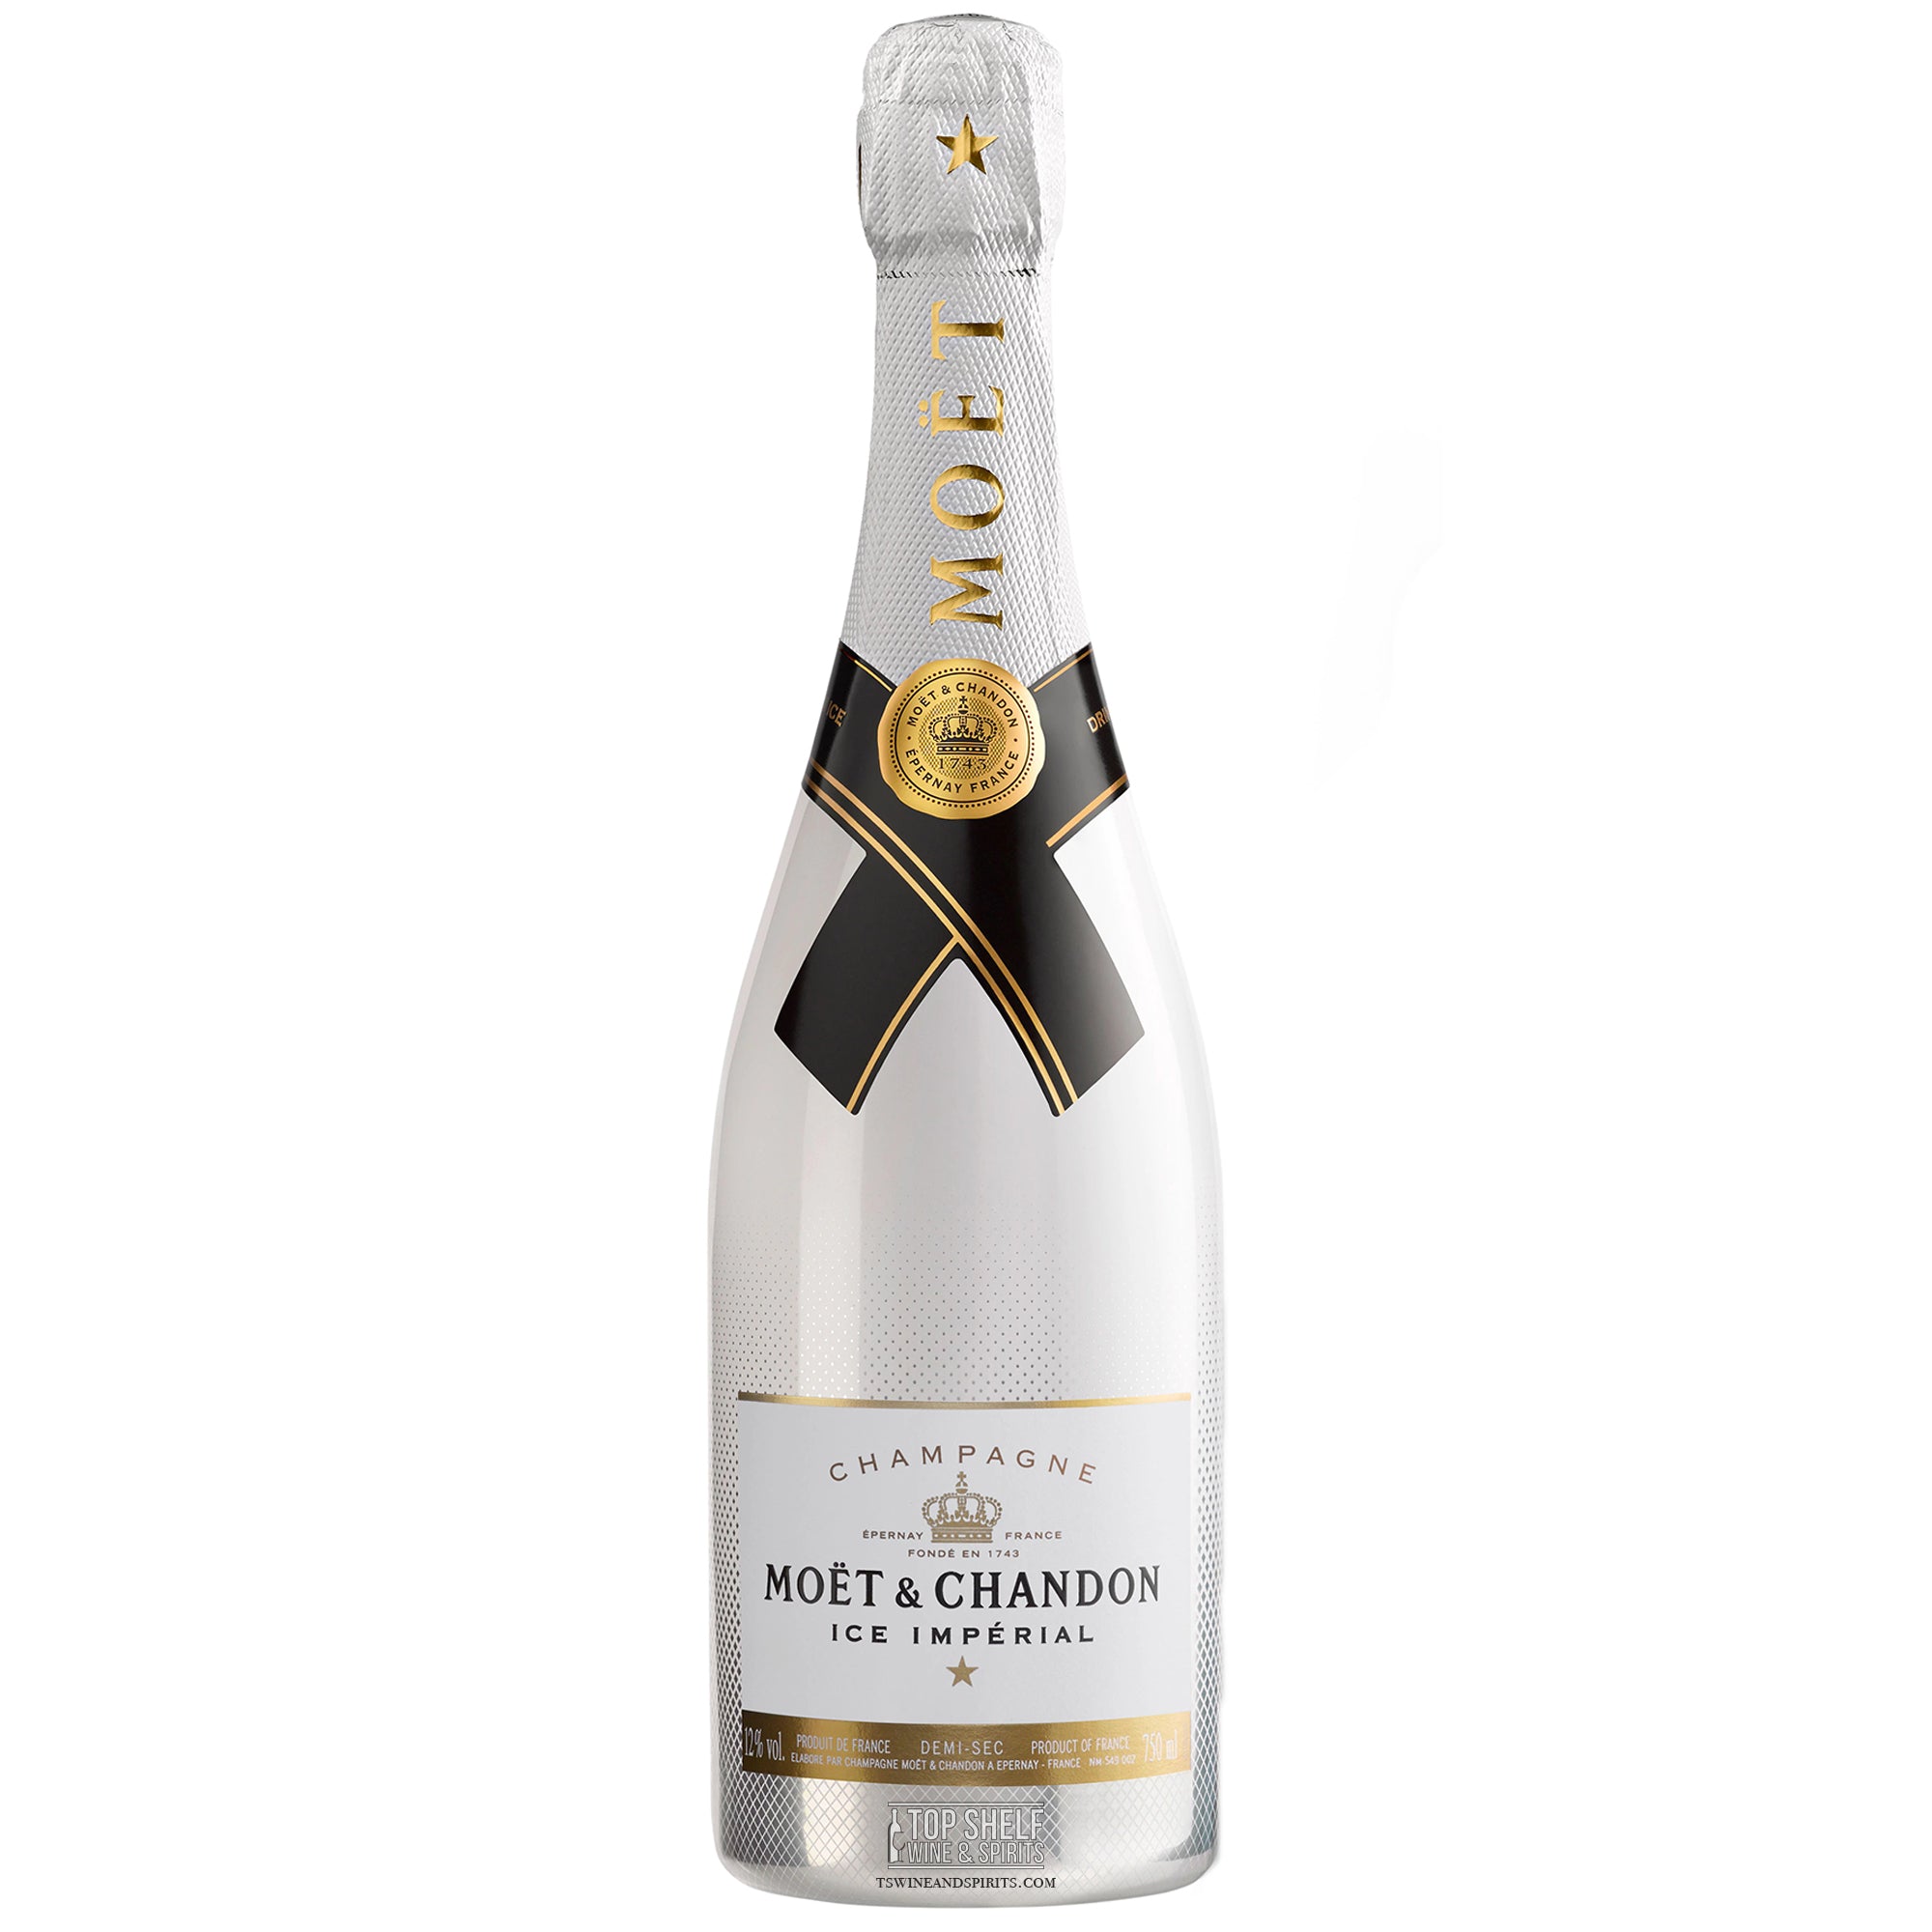 Bottle Of Moet & Chandon Champagne. Moet Chandon Is One Of The